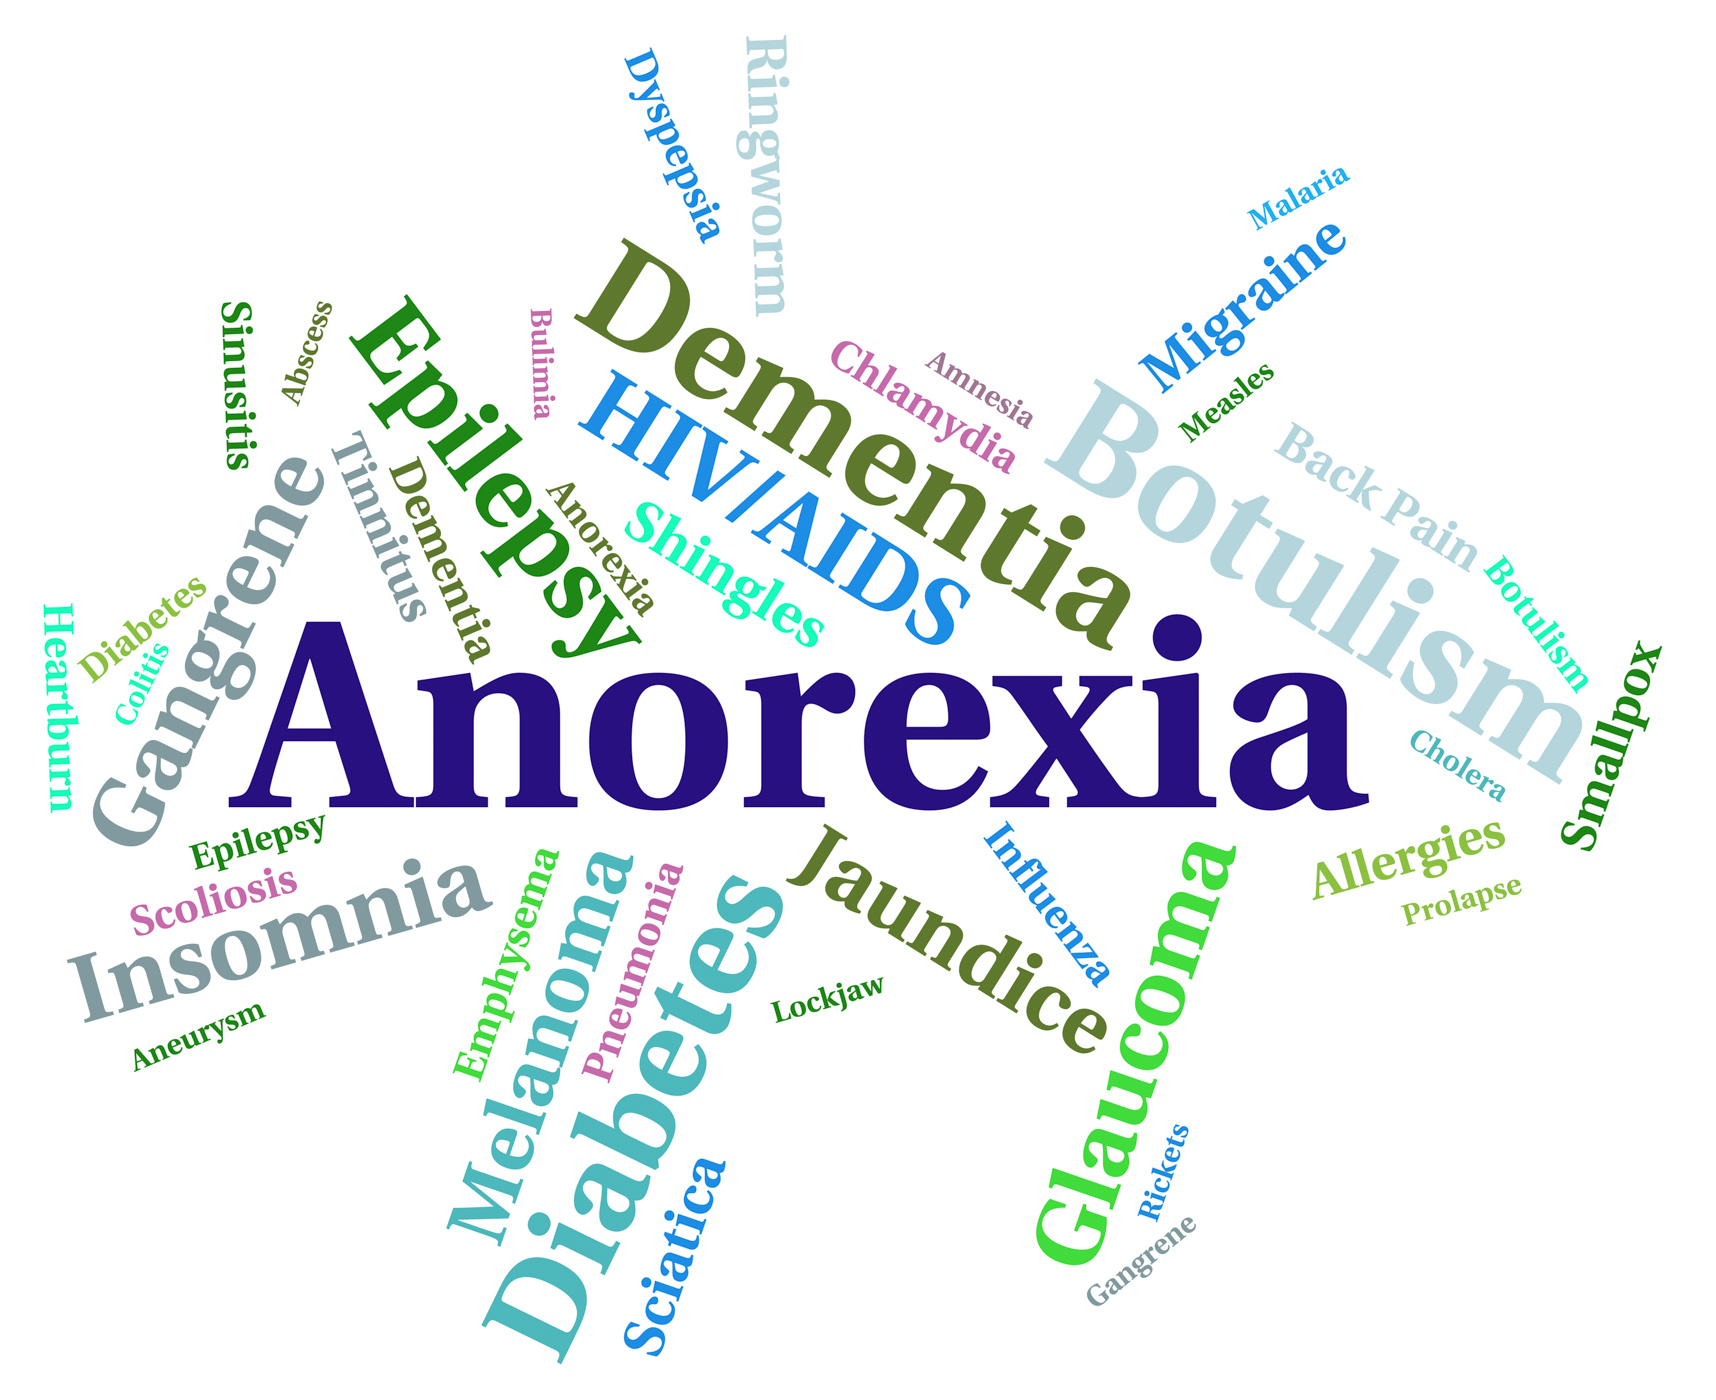 Anorexia illness represents sickly looking and afflictions photo